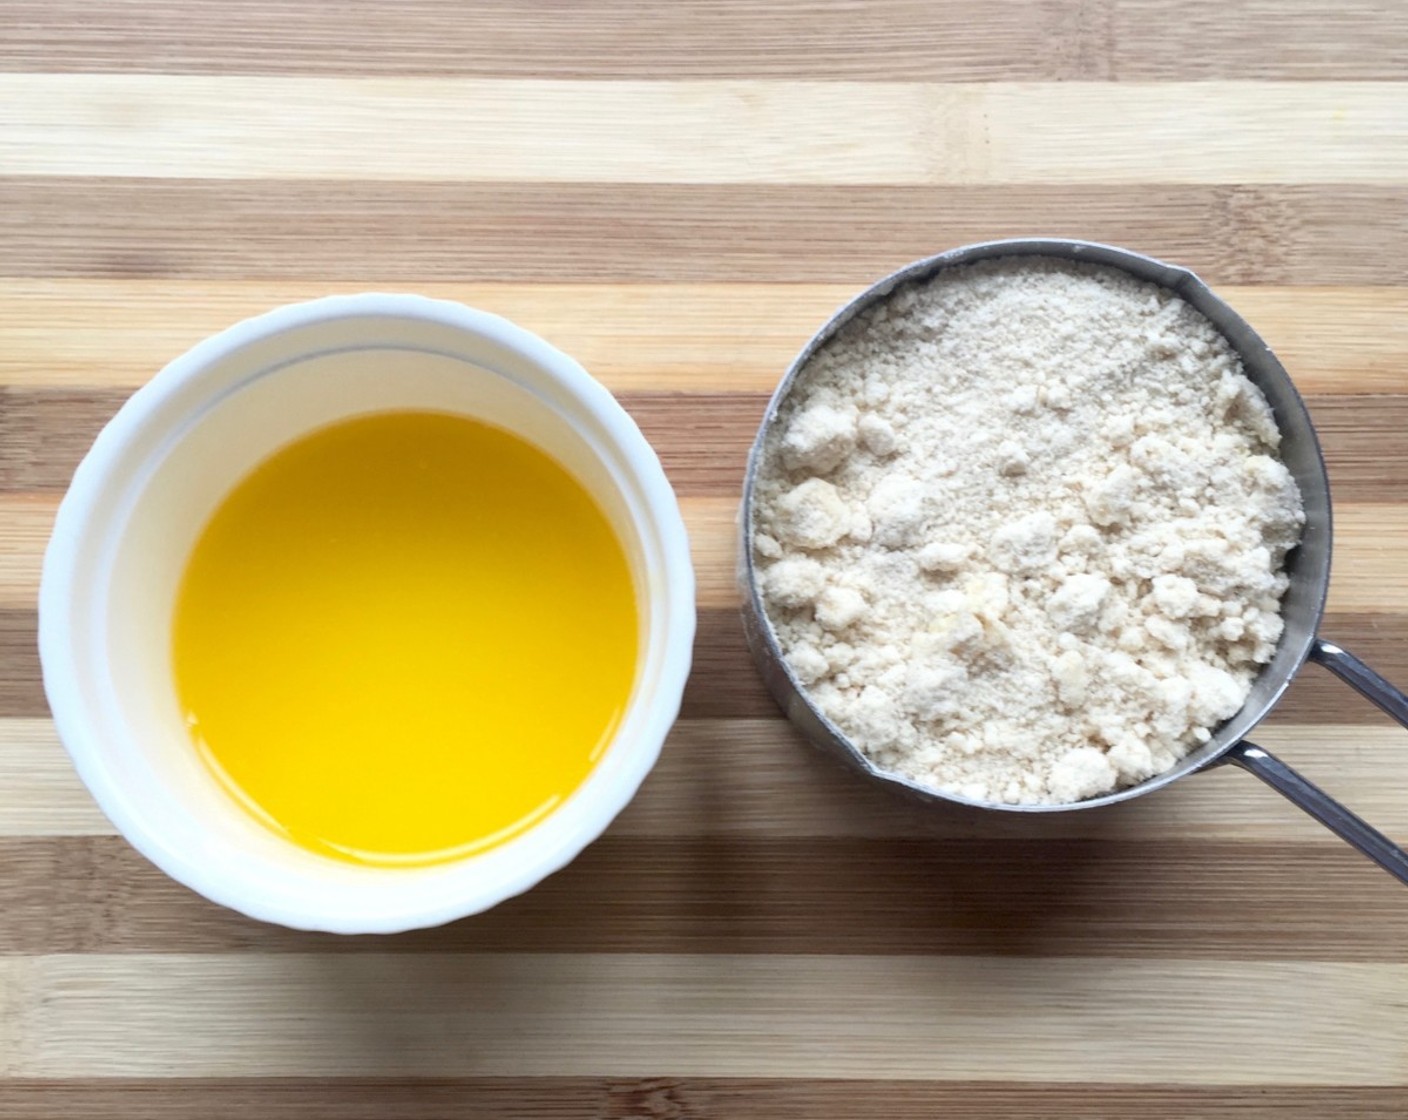 step 20 To make streusel topping, melt Butter (2 Tbsp) to mix with the flour mixture set aside earlier.